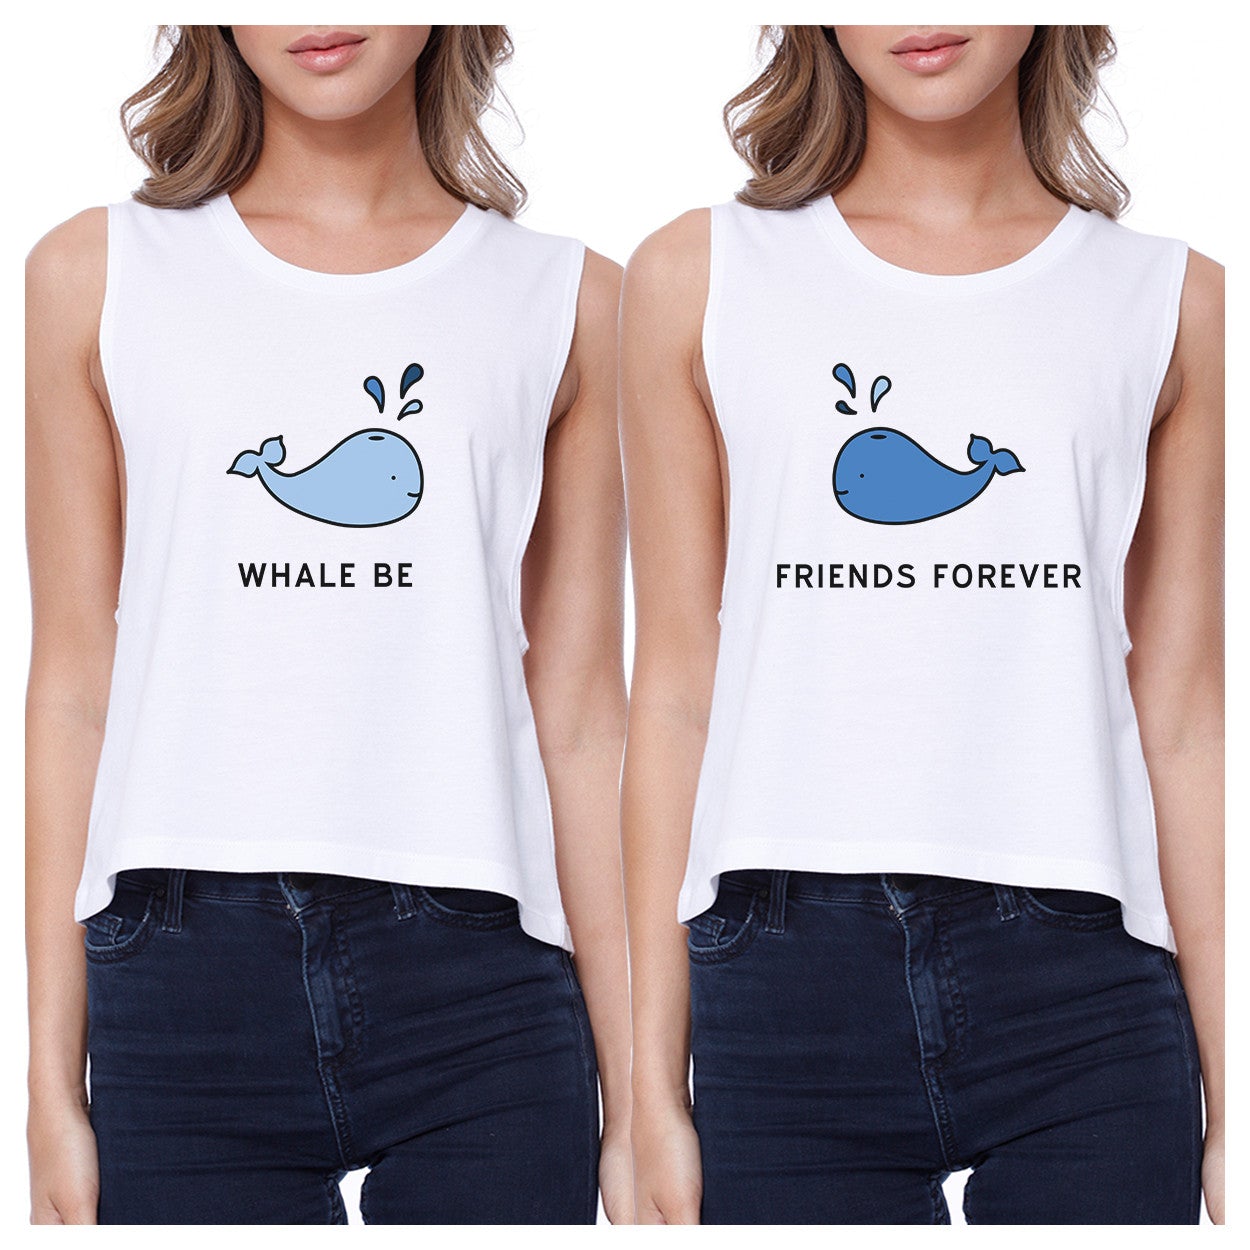 Whale Be Friend Forever BFF Matching Crop Tops Cute Summer Tanks White